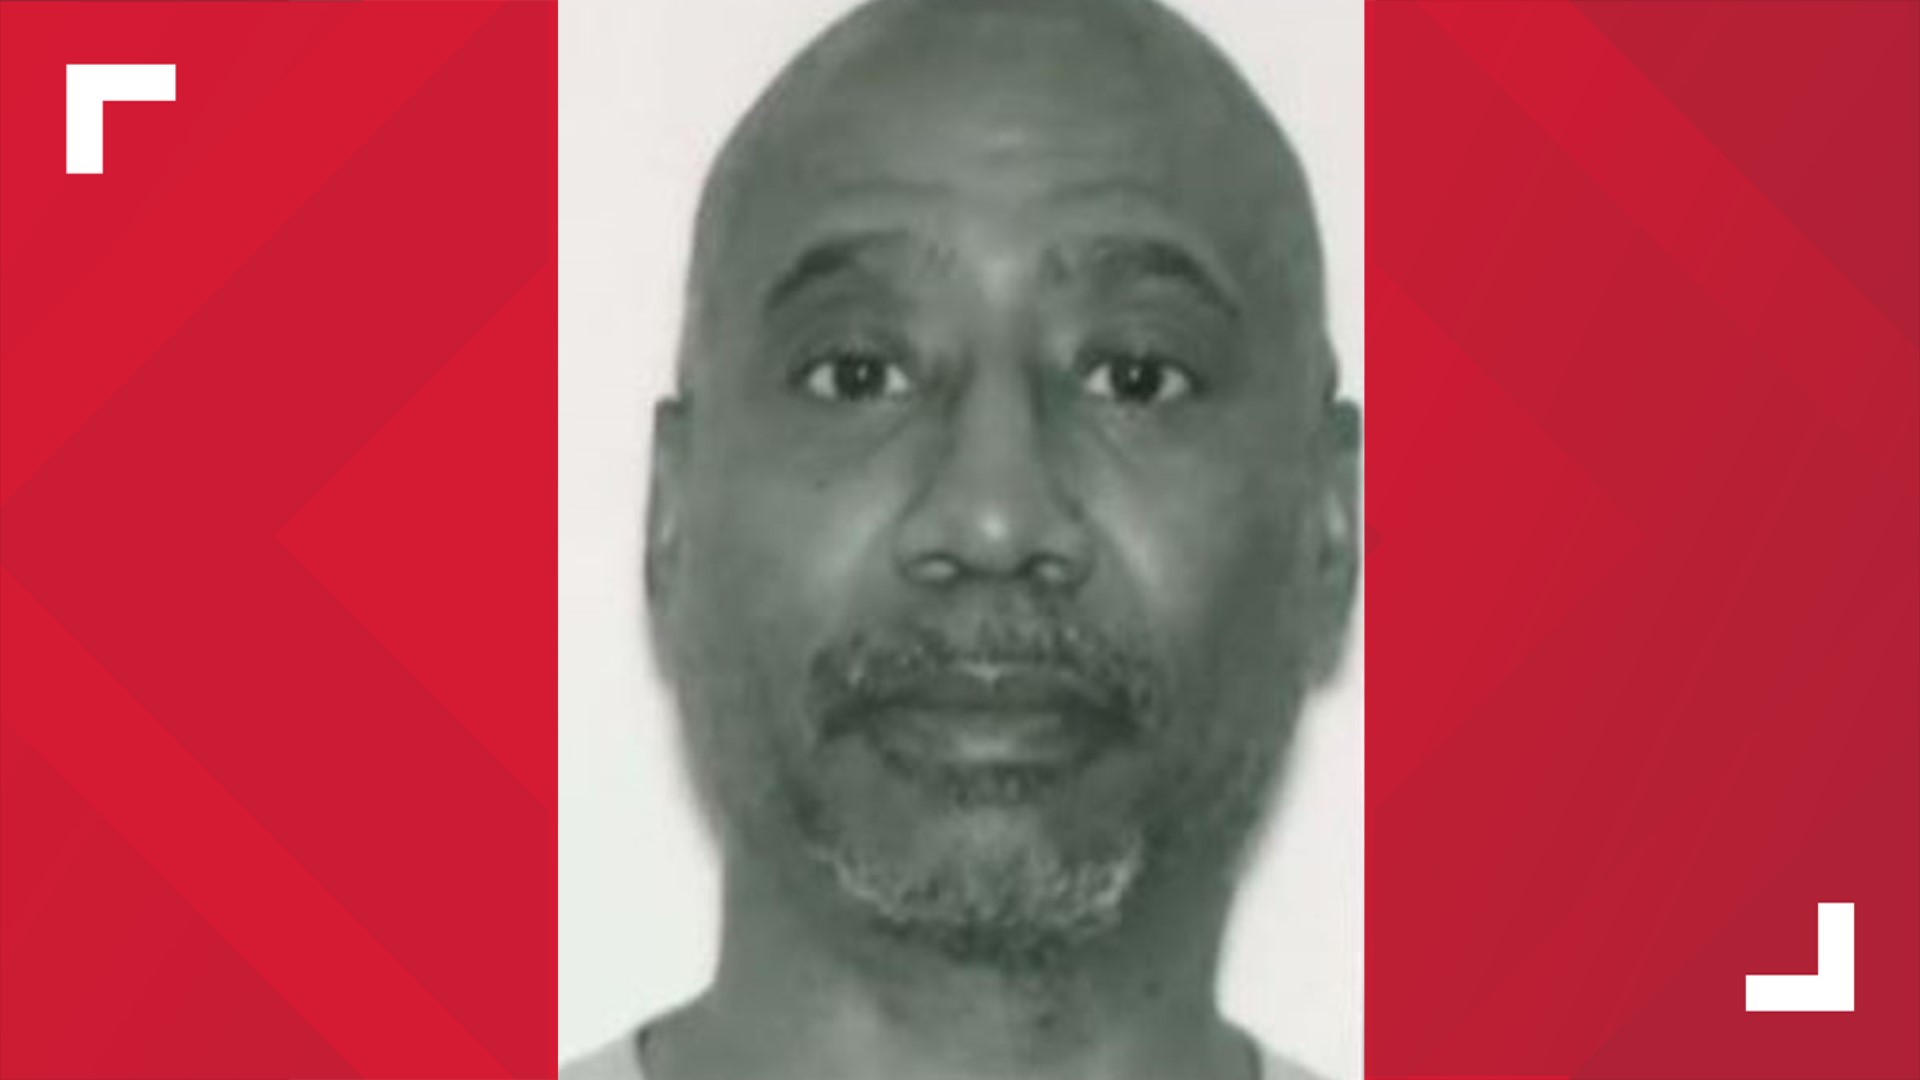 The suspect was identified as 57-year-old Todd Harper.